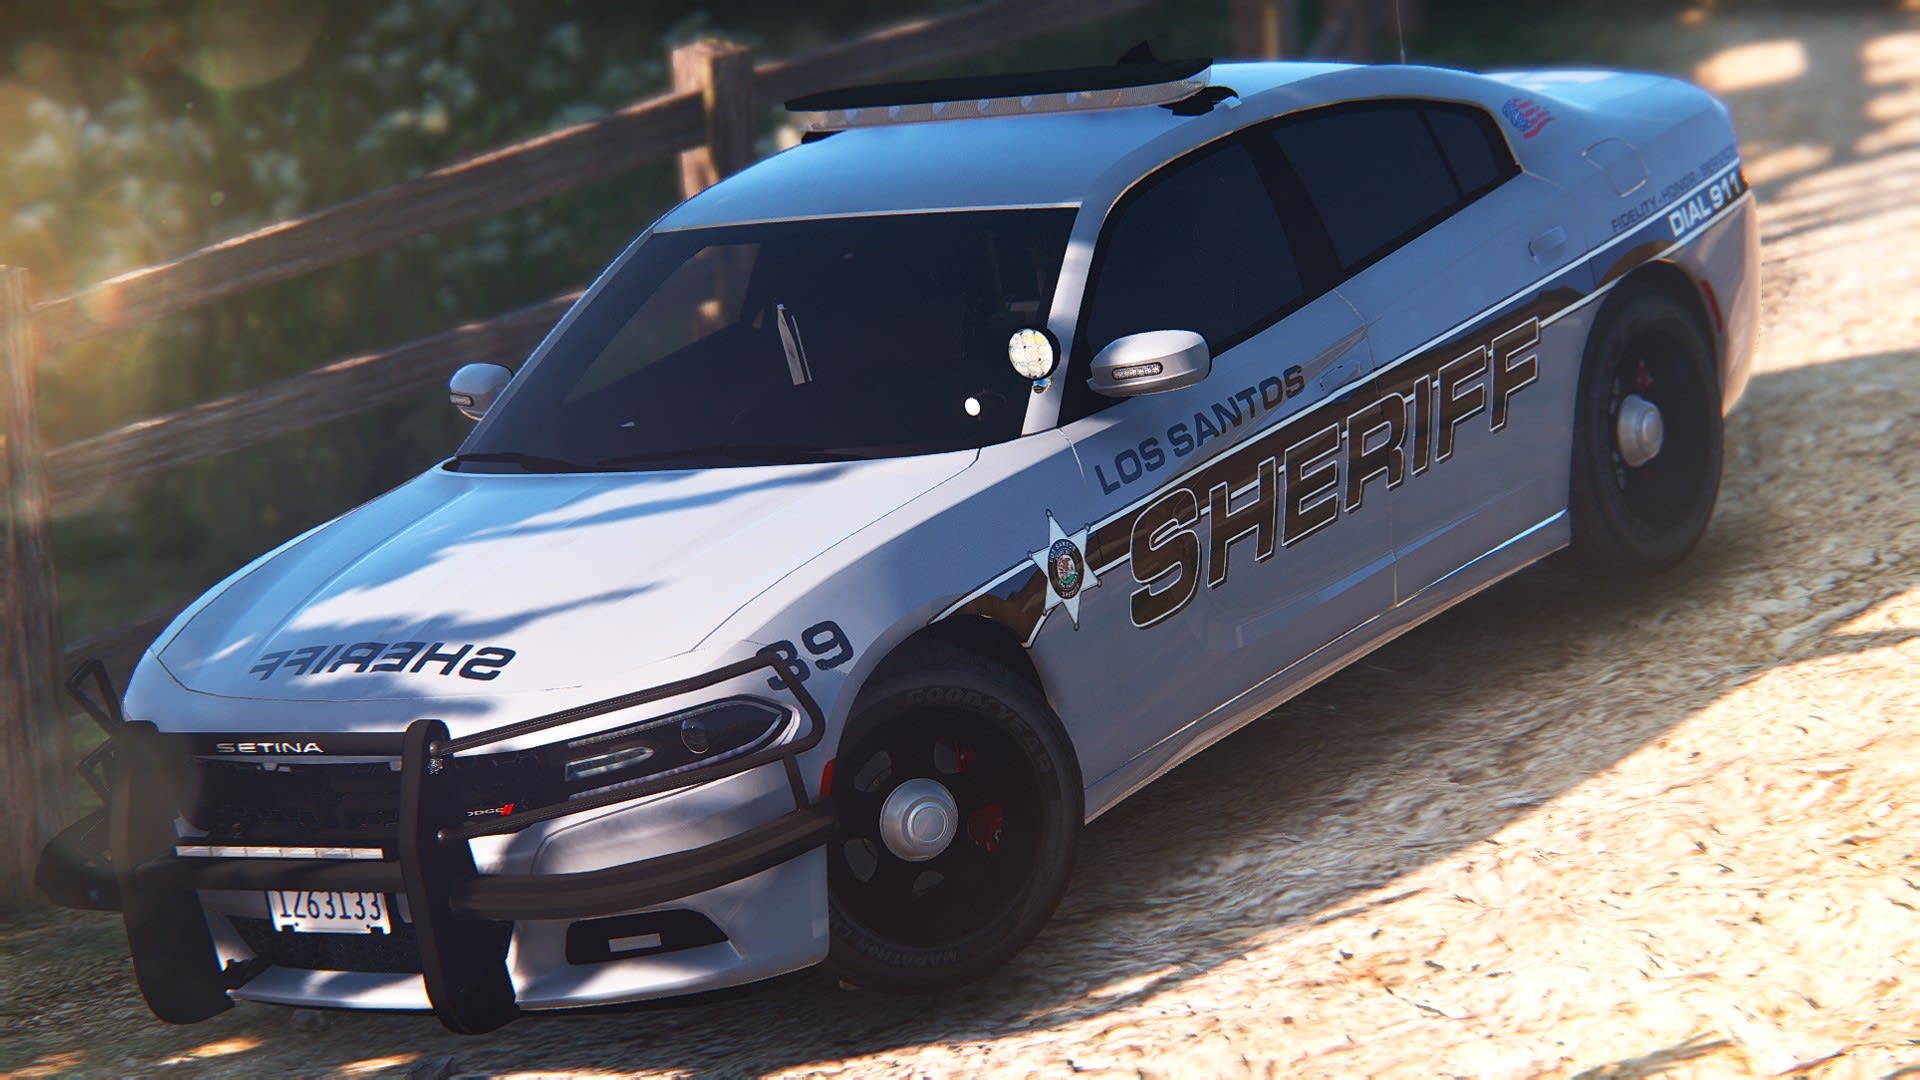 How to Install LSPDFR 